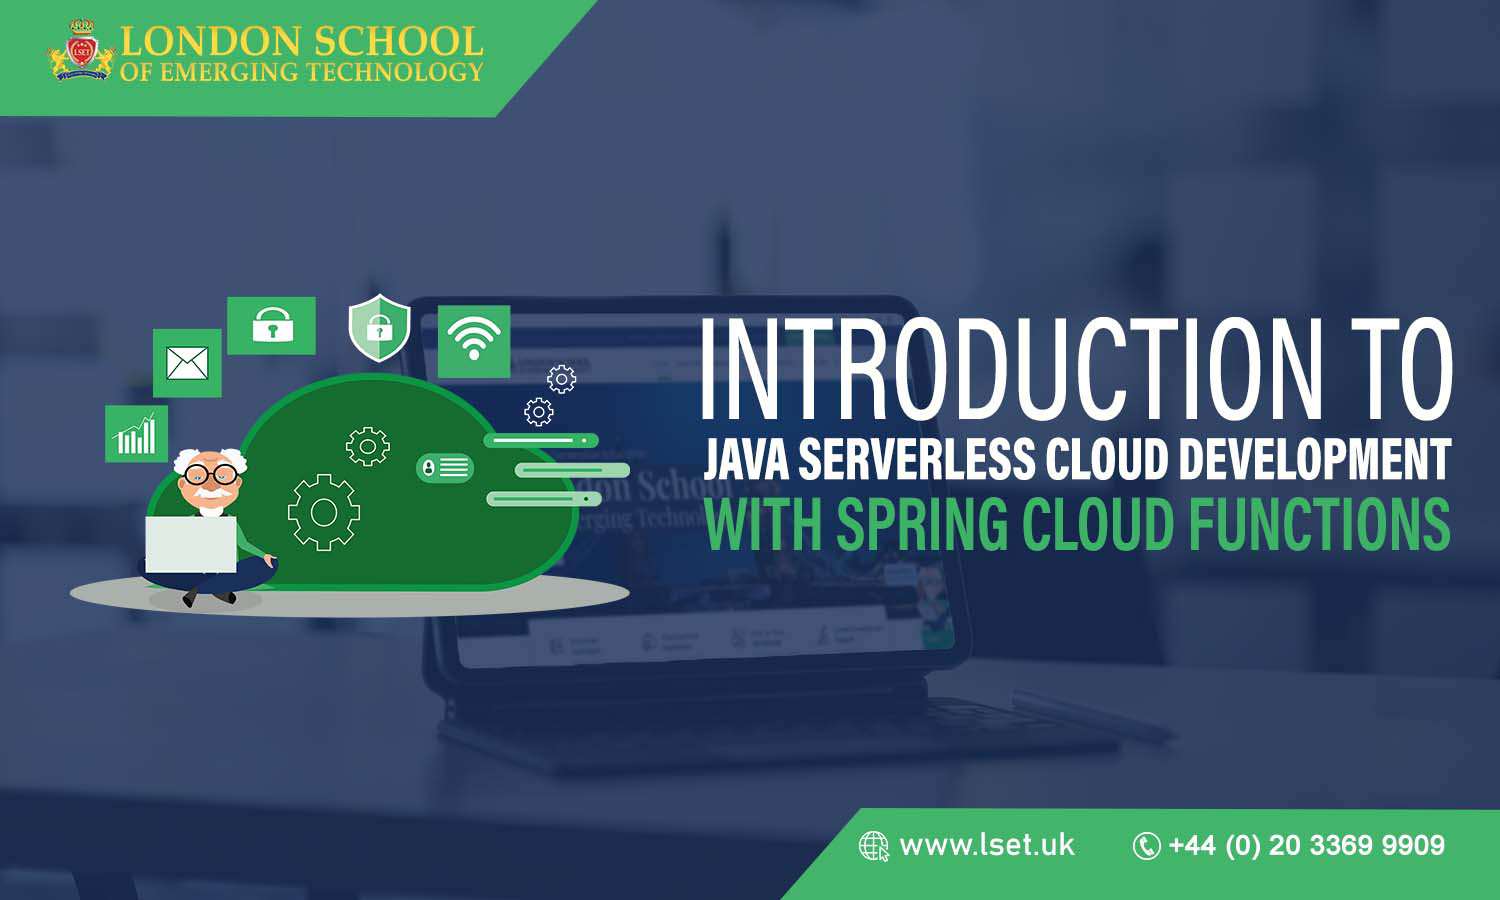 Introduction to Java Serverless Cloud Development with Spring Cloud Functions